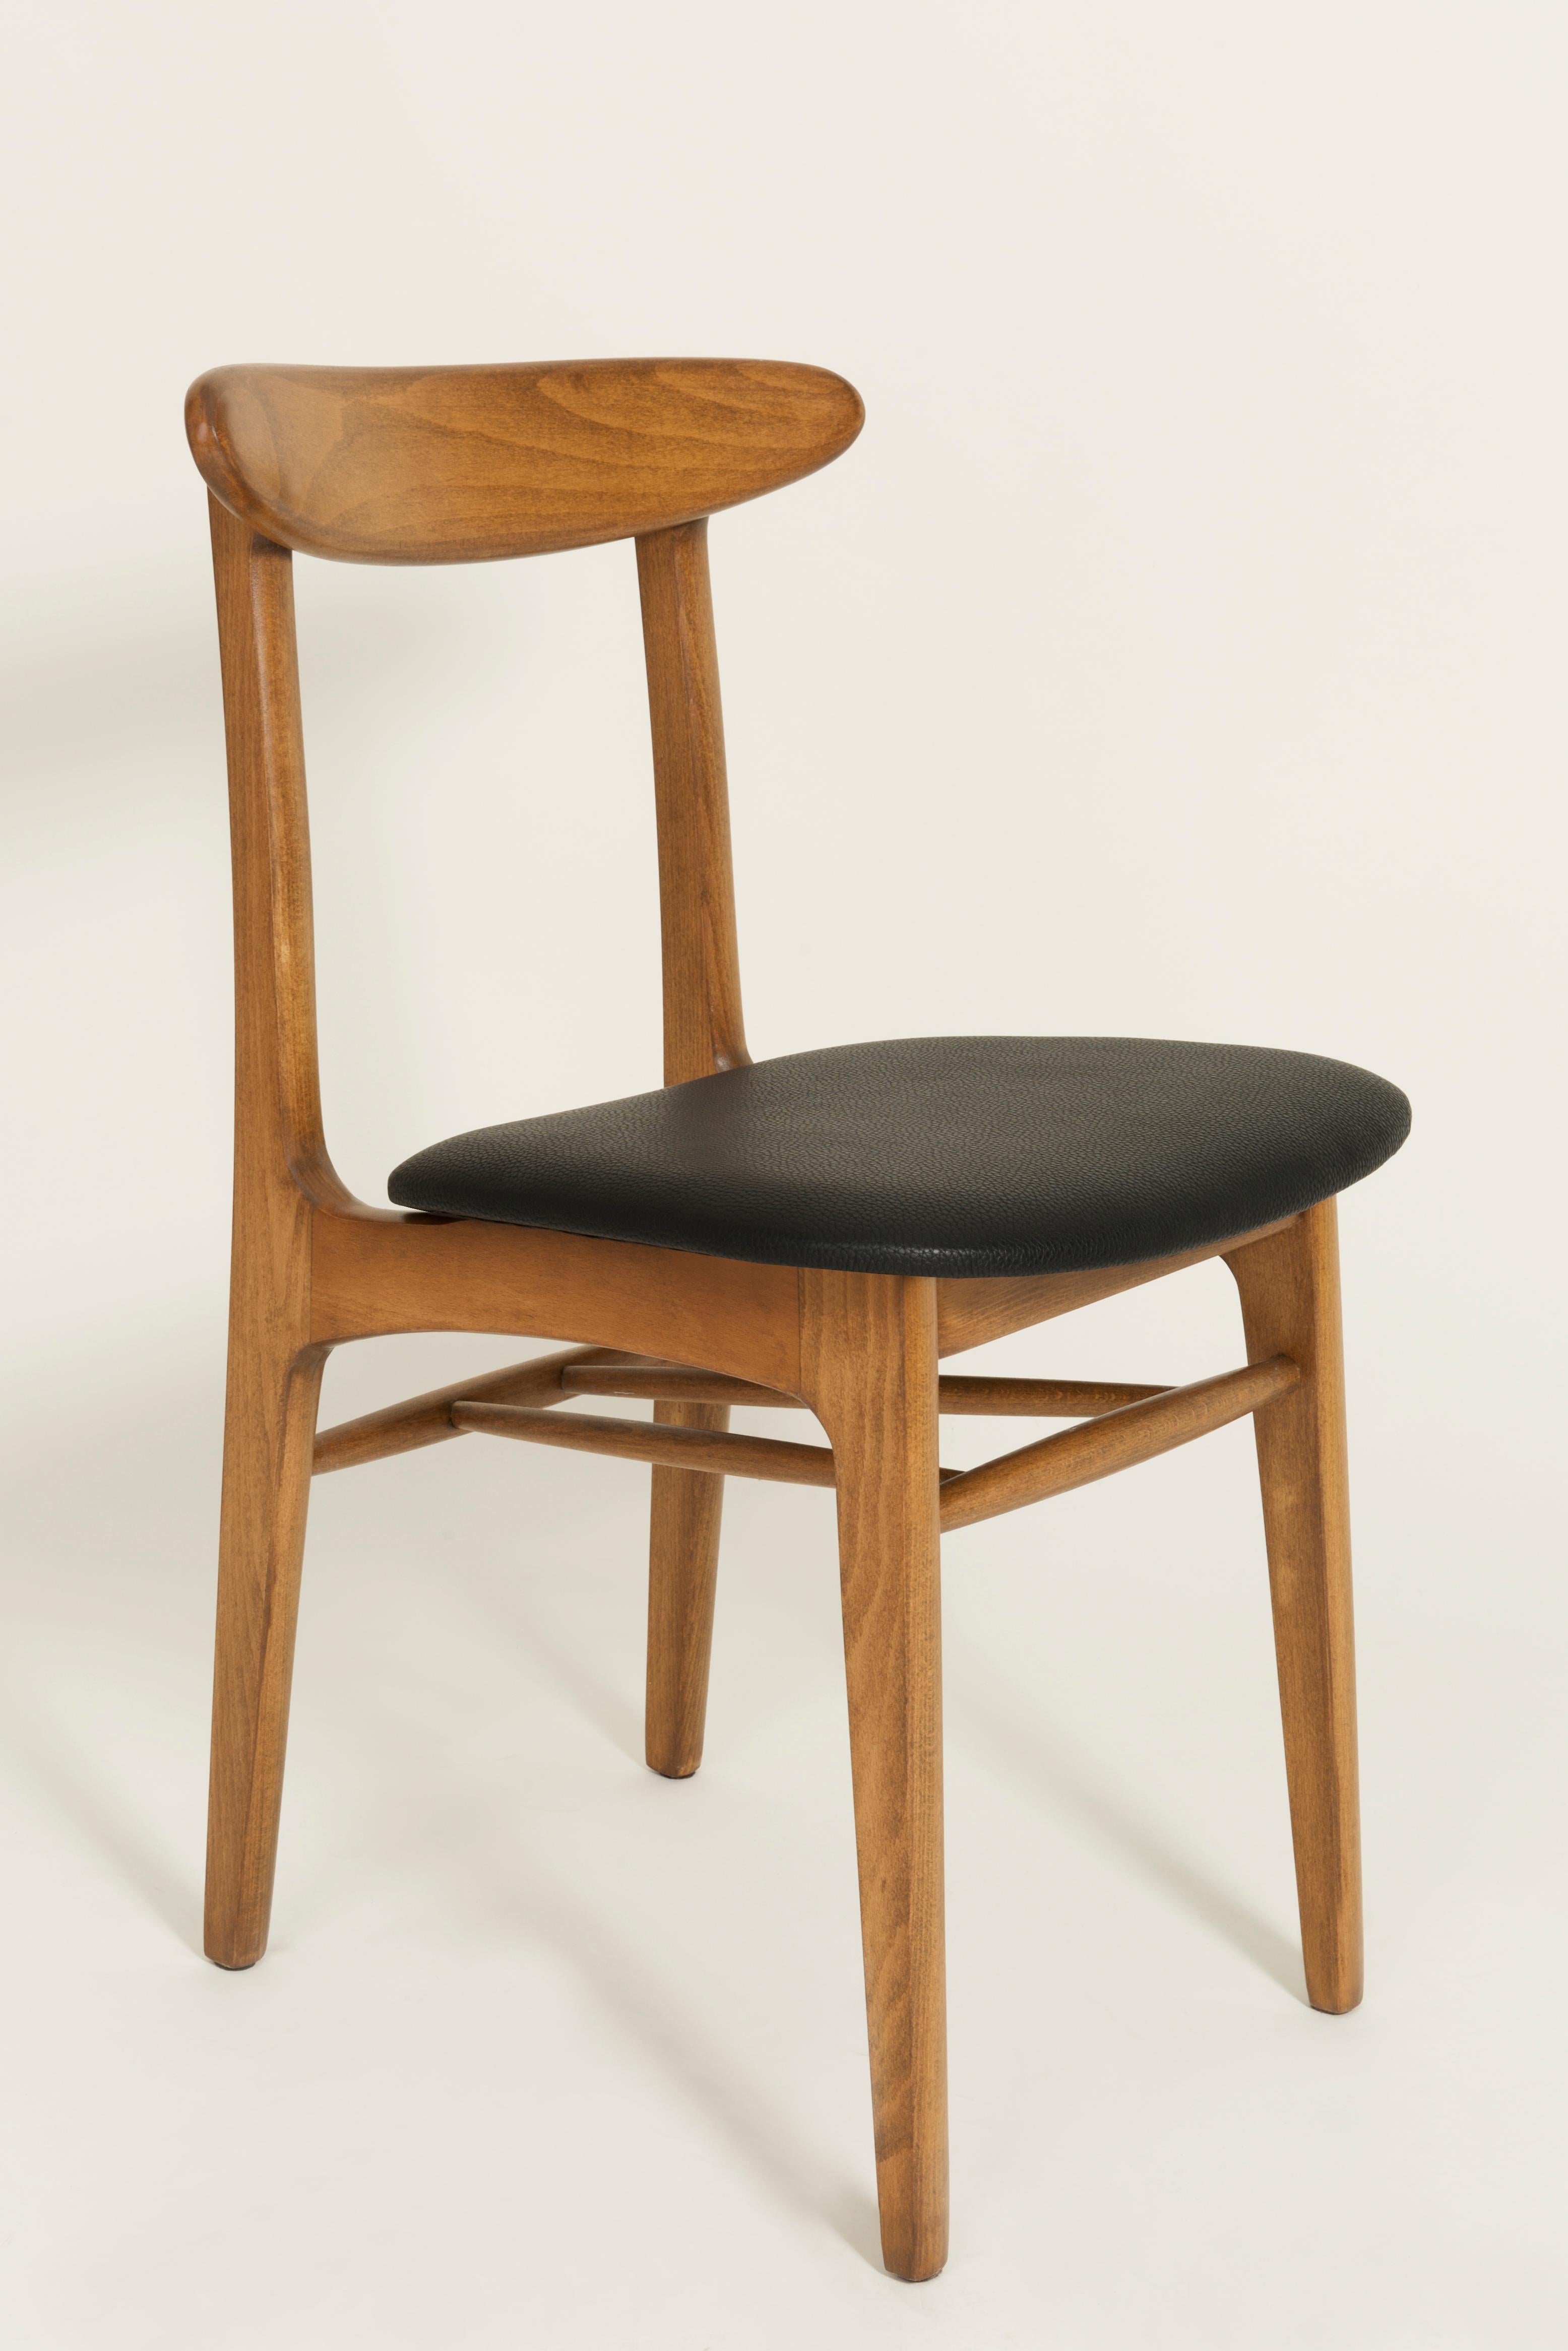 Chairs type 5908, designed in 1960s by Rajmund Teofil Halas, are one of the most recognizable projects of Polish design.

The chairs have a simple, modernist silhouette. They are characterized by streamlined, organic characteristic shapes for